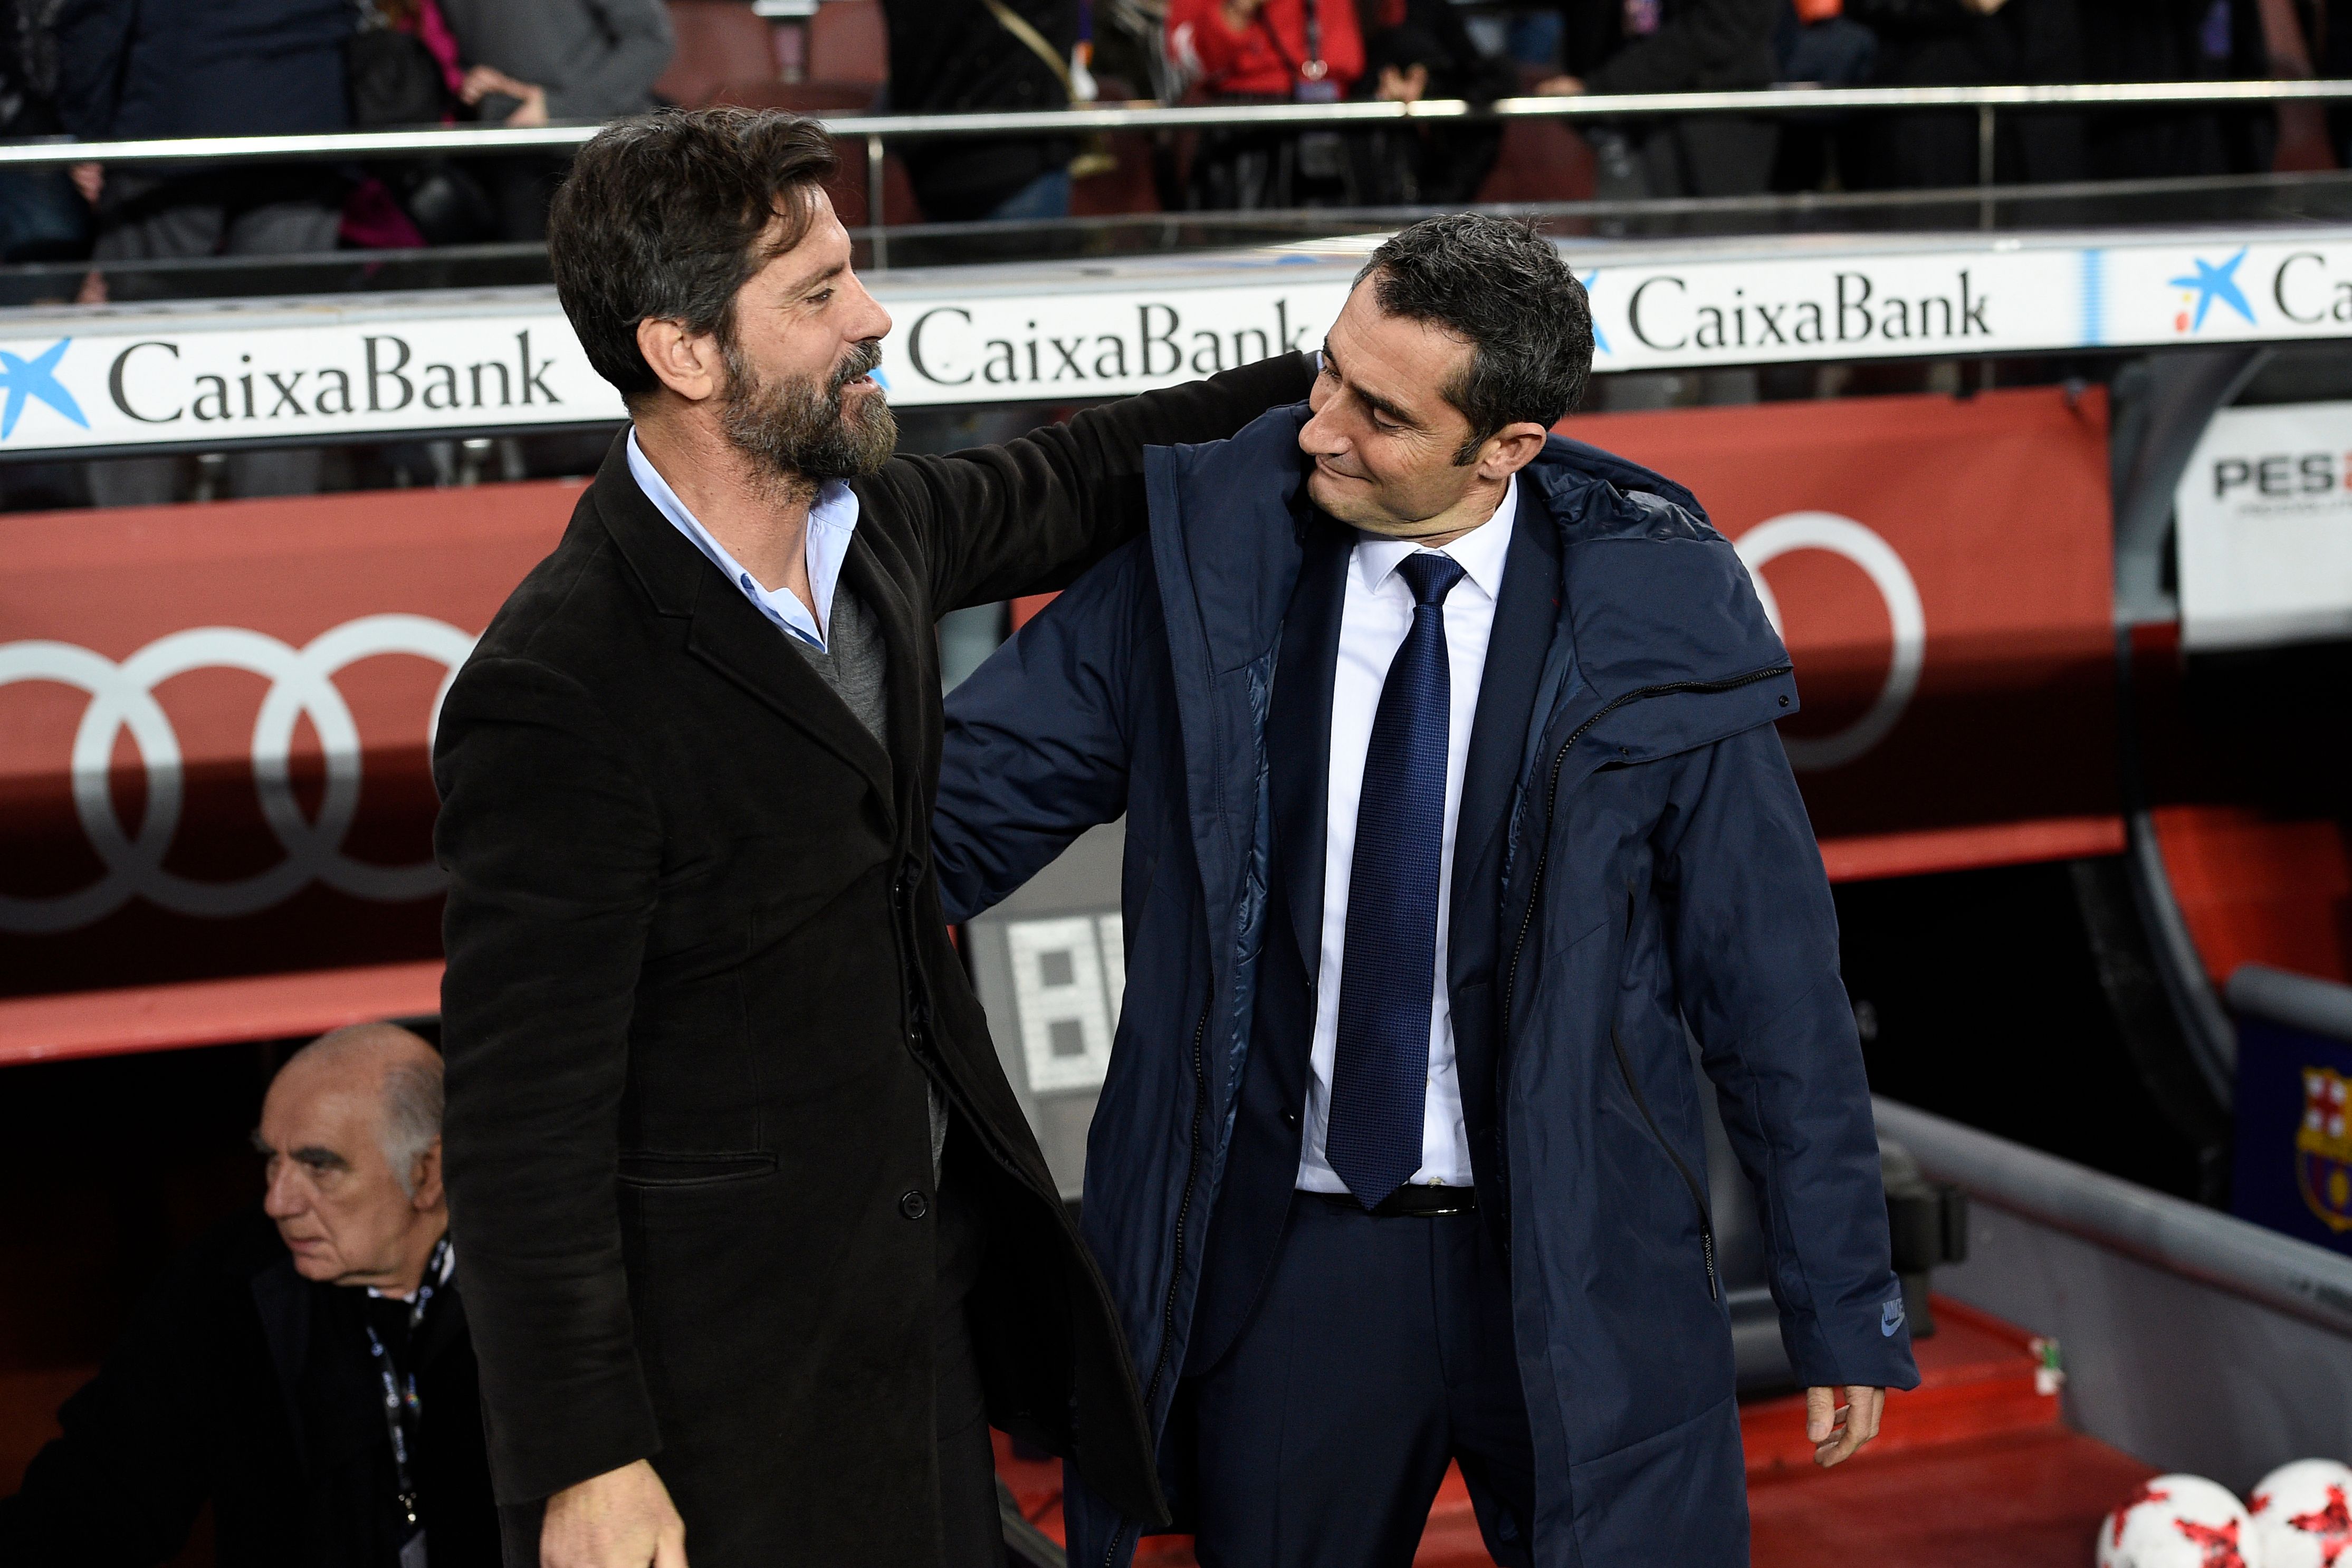 Barcelona's Spanish coach Ernesto Valverde (R) greets Espanyol's Spanish coach Quique Sanchez Flores ahead of the Spanish 'Copa del Rey' (King's cup) quarter-final second leg football match between FC Barcelona and RCD Espanyol at the Camp Nou stadium in Barcelona on January 25, 2018.  / AFP PHOTO / LLUIS GENE        (Photo credit should read LLUIS GENE/AFP/Getty Images)